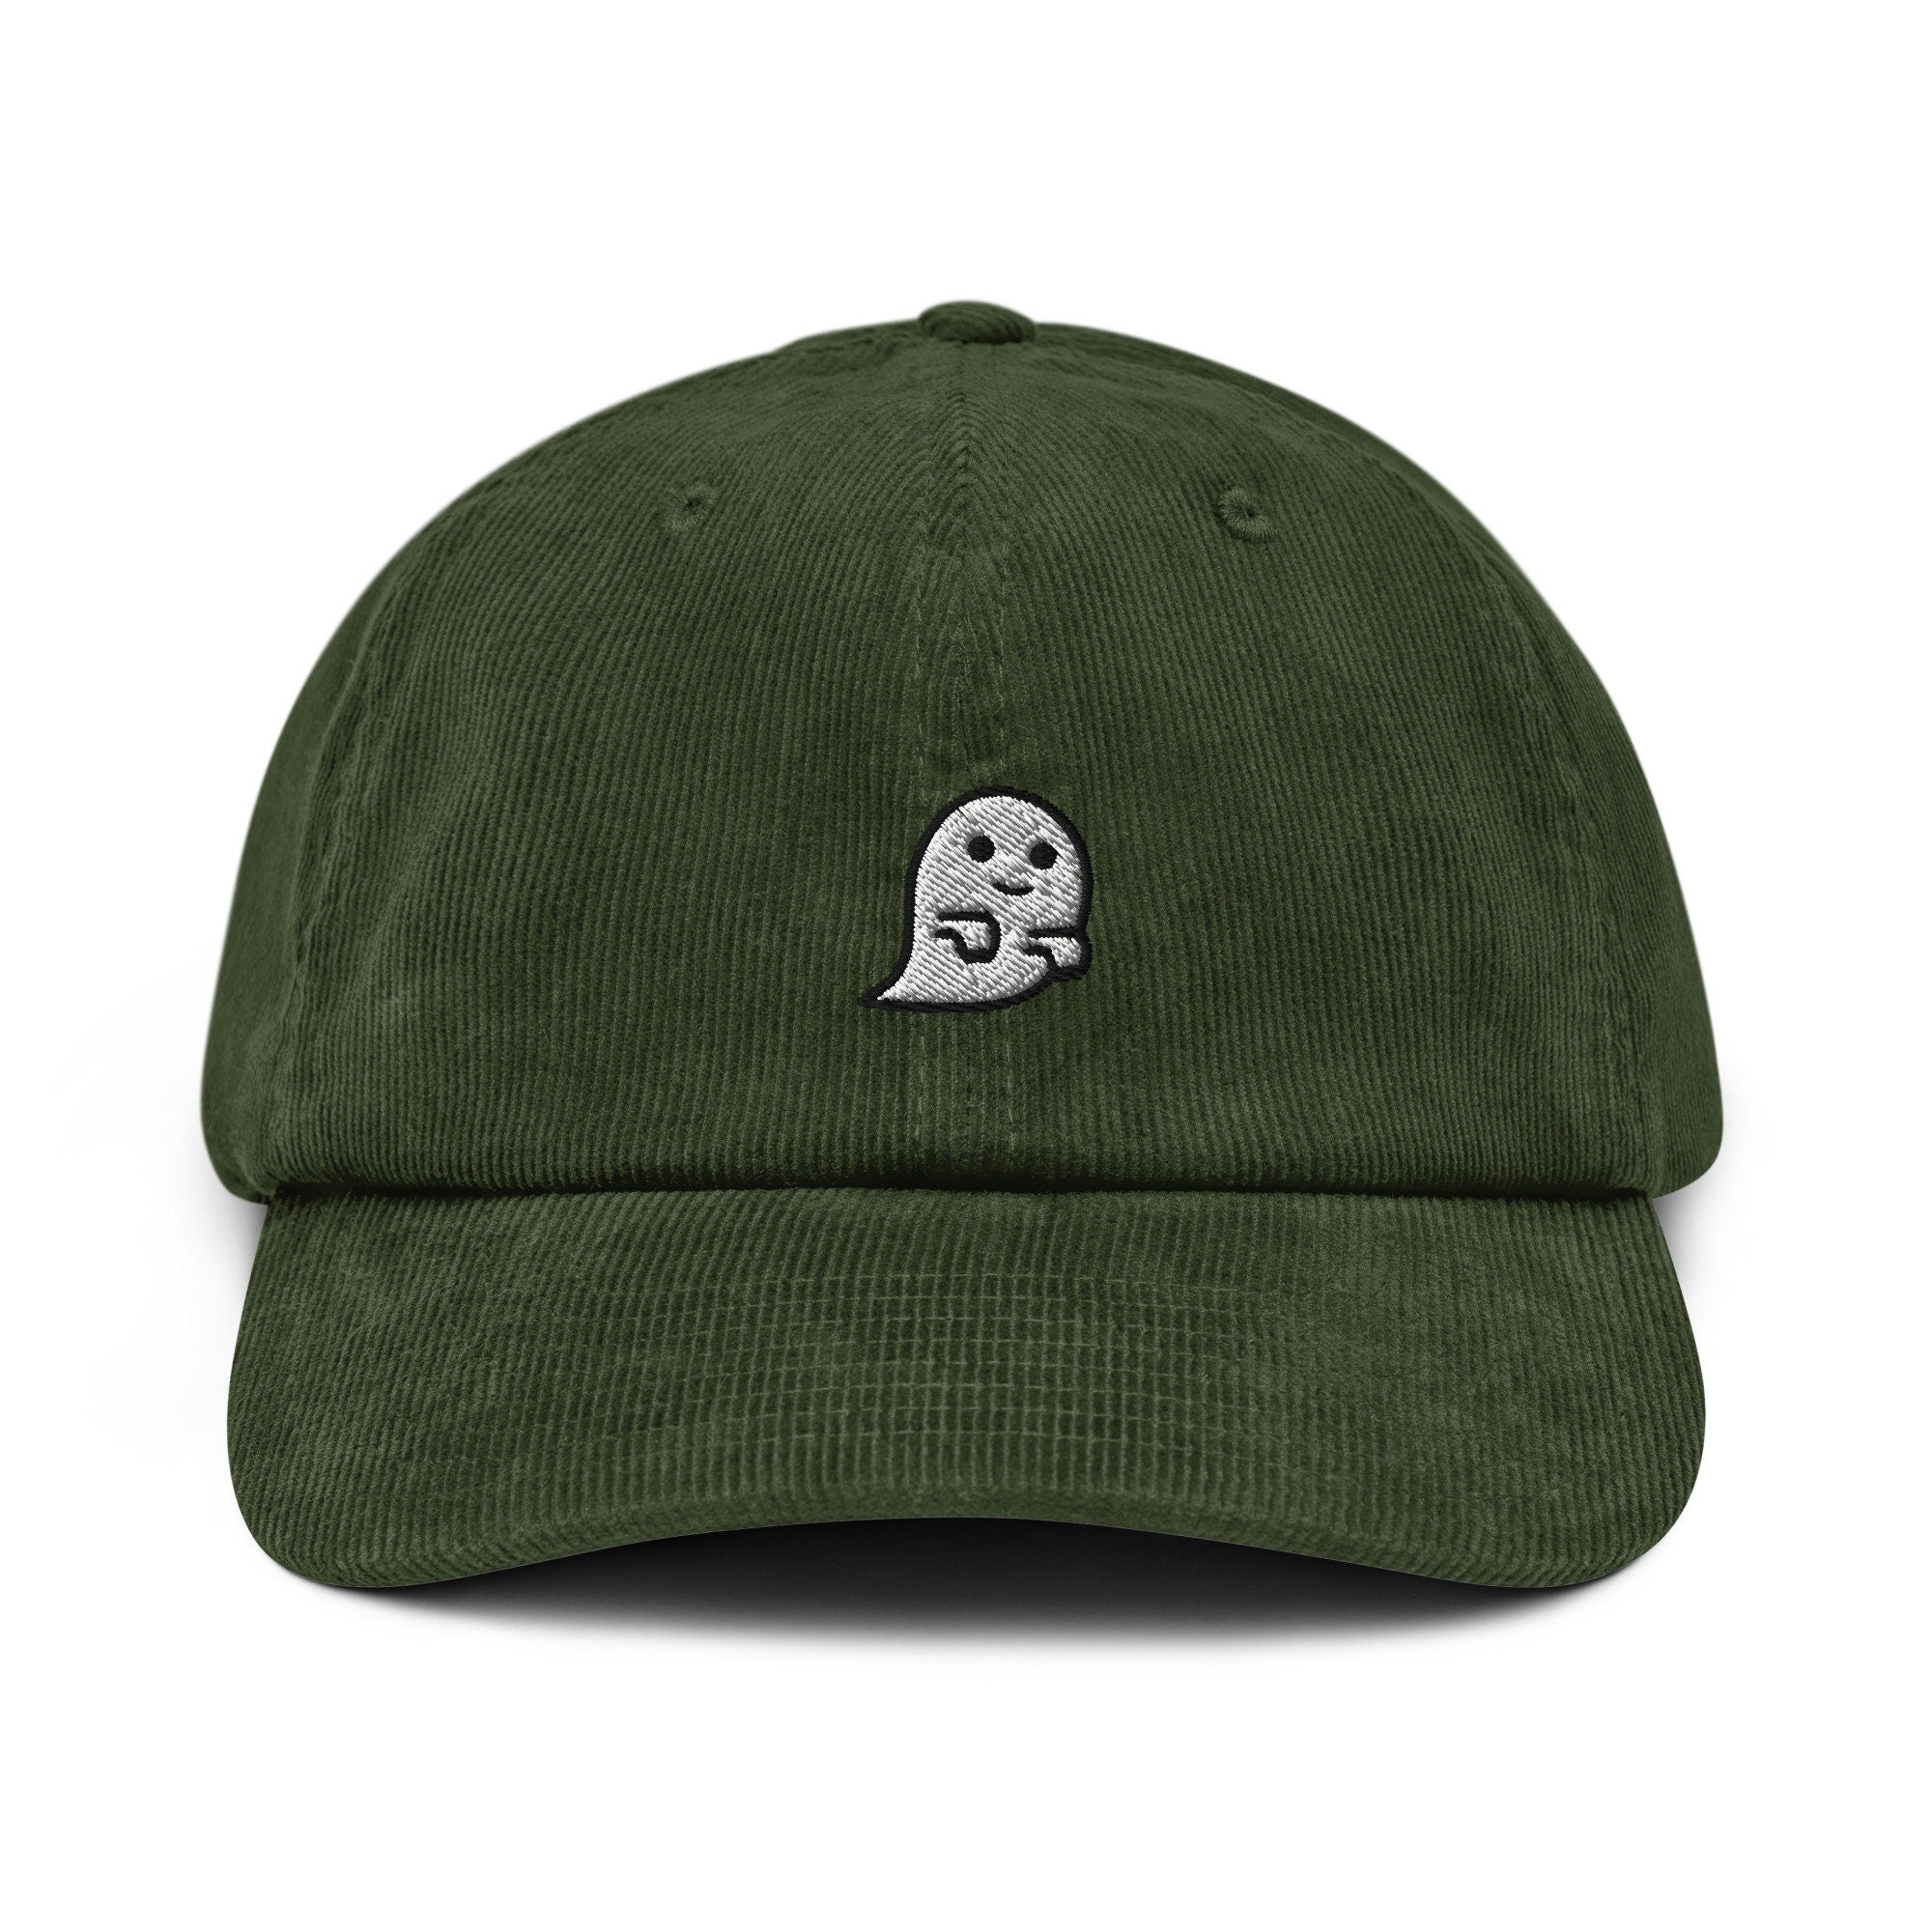 Ghost Corduroy Hat, Handmade Embroidered Corduroy Dad Cap - Multiple Colors